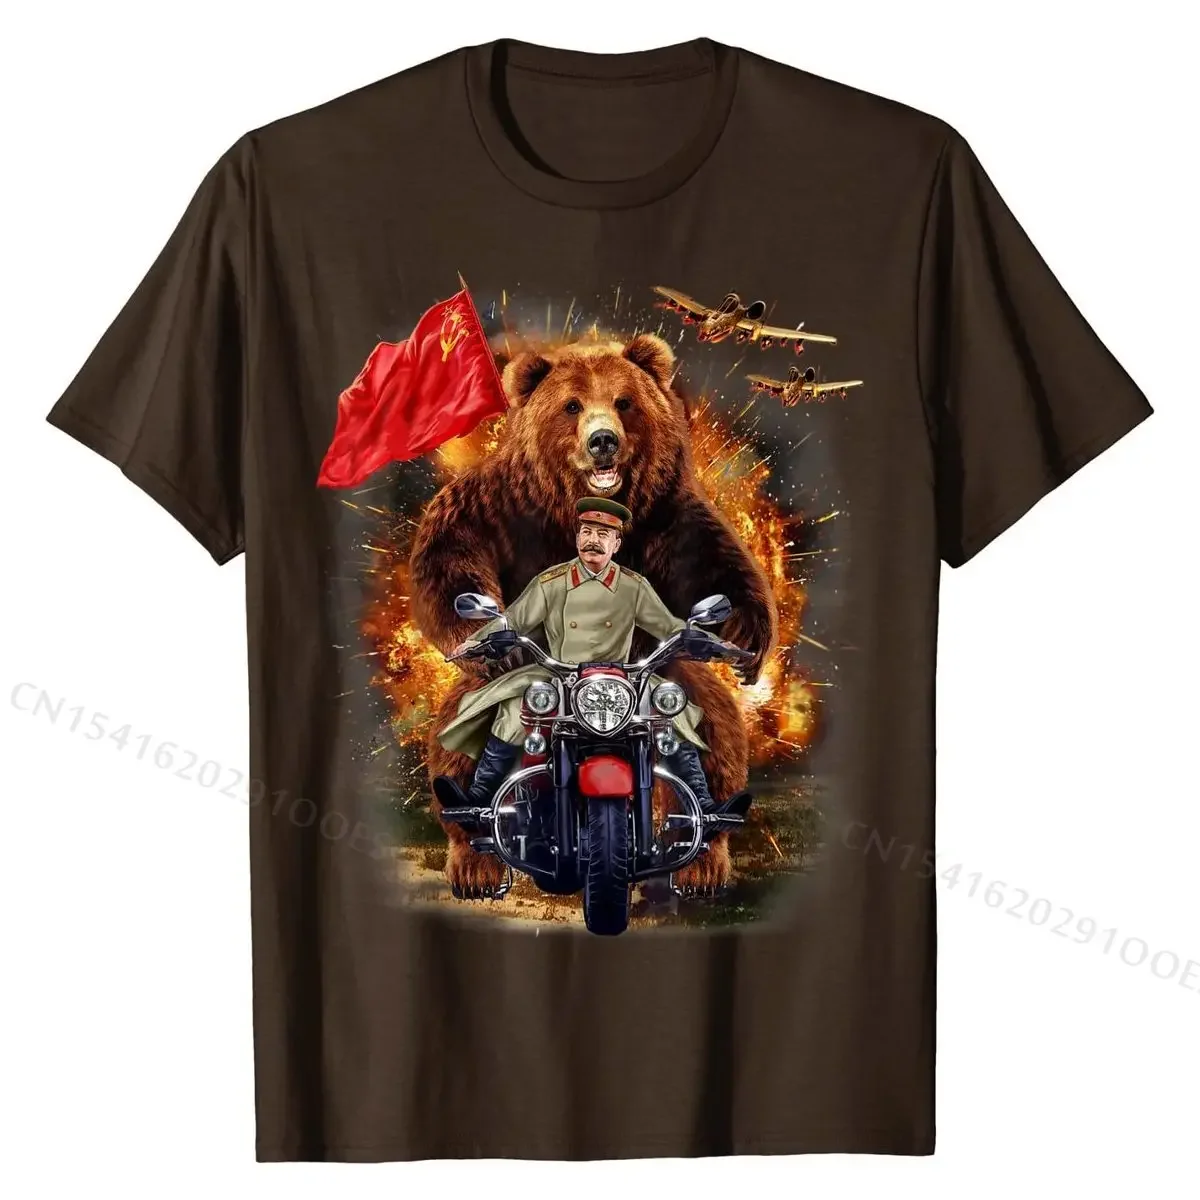 T-Shirt, Grizzly  and Soviet Stalin in Epic Battle T Shirts for Men Summer Tops Shirt Prevalent Printed Cotton